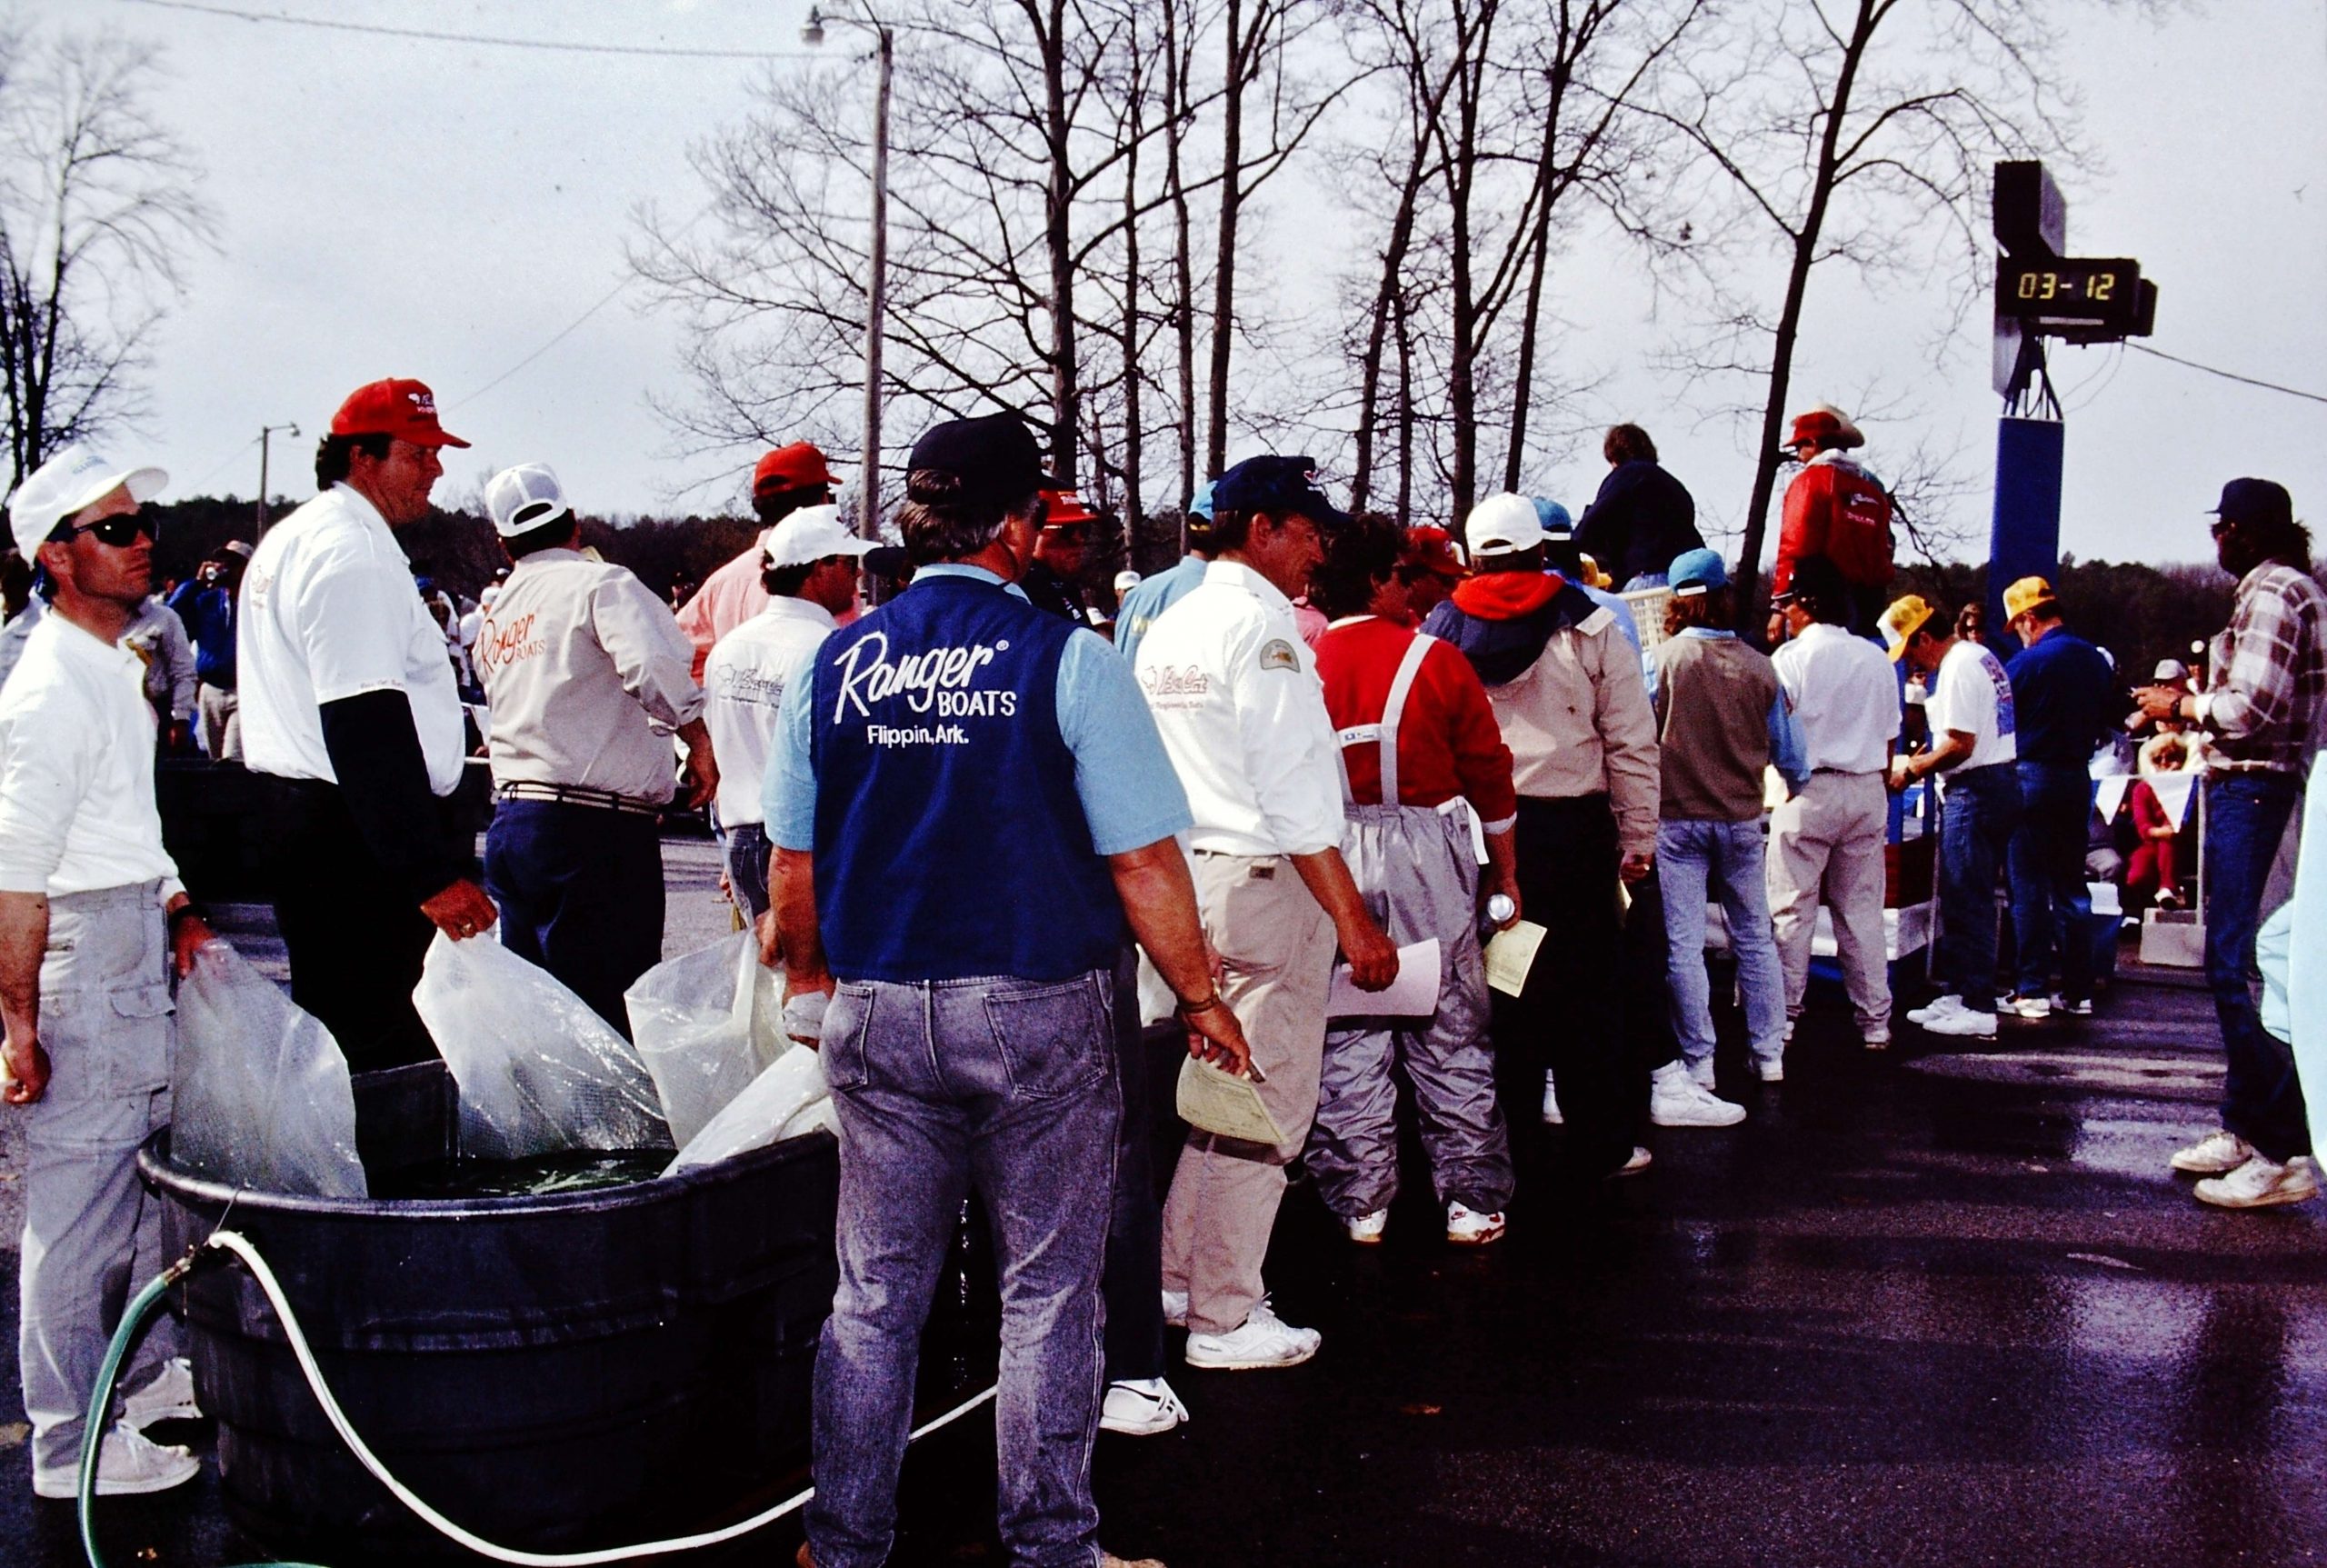 Through the decades, Kentucky Lake has hosted numerous B.A.S.S. tournament events. In 1993, it was the site of the Kentucky Bassmaster Invitational held in early April. With nearly 300 competitors including many of the best bass anglers in the sport at that time, the winner was definitely a surprise for fishing fans.